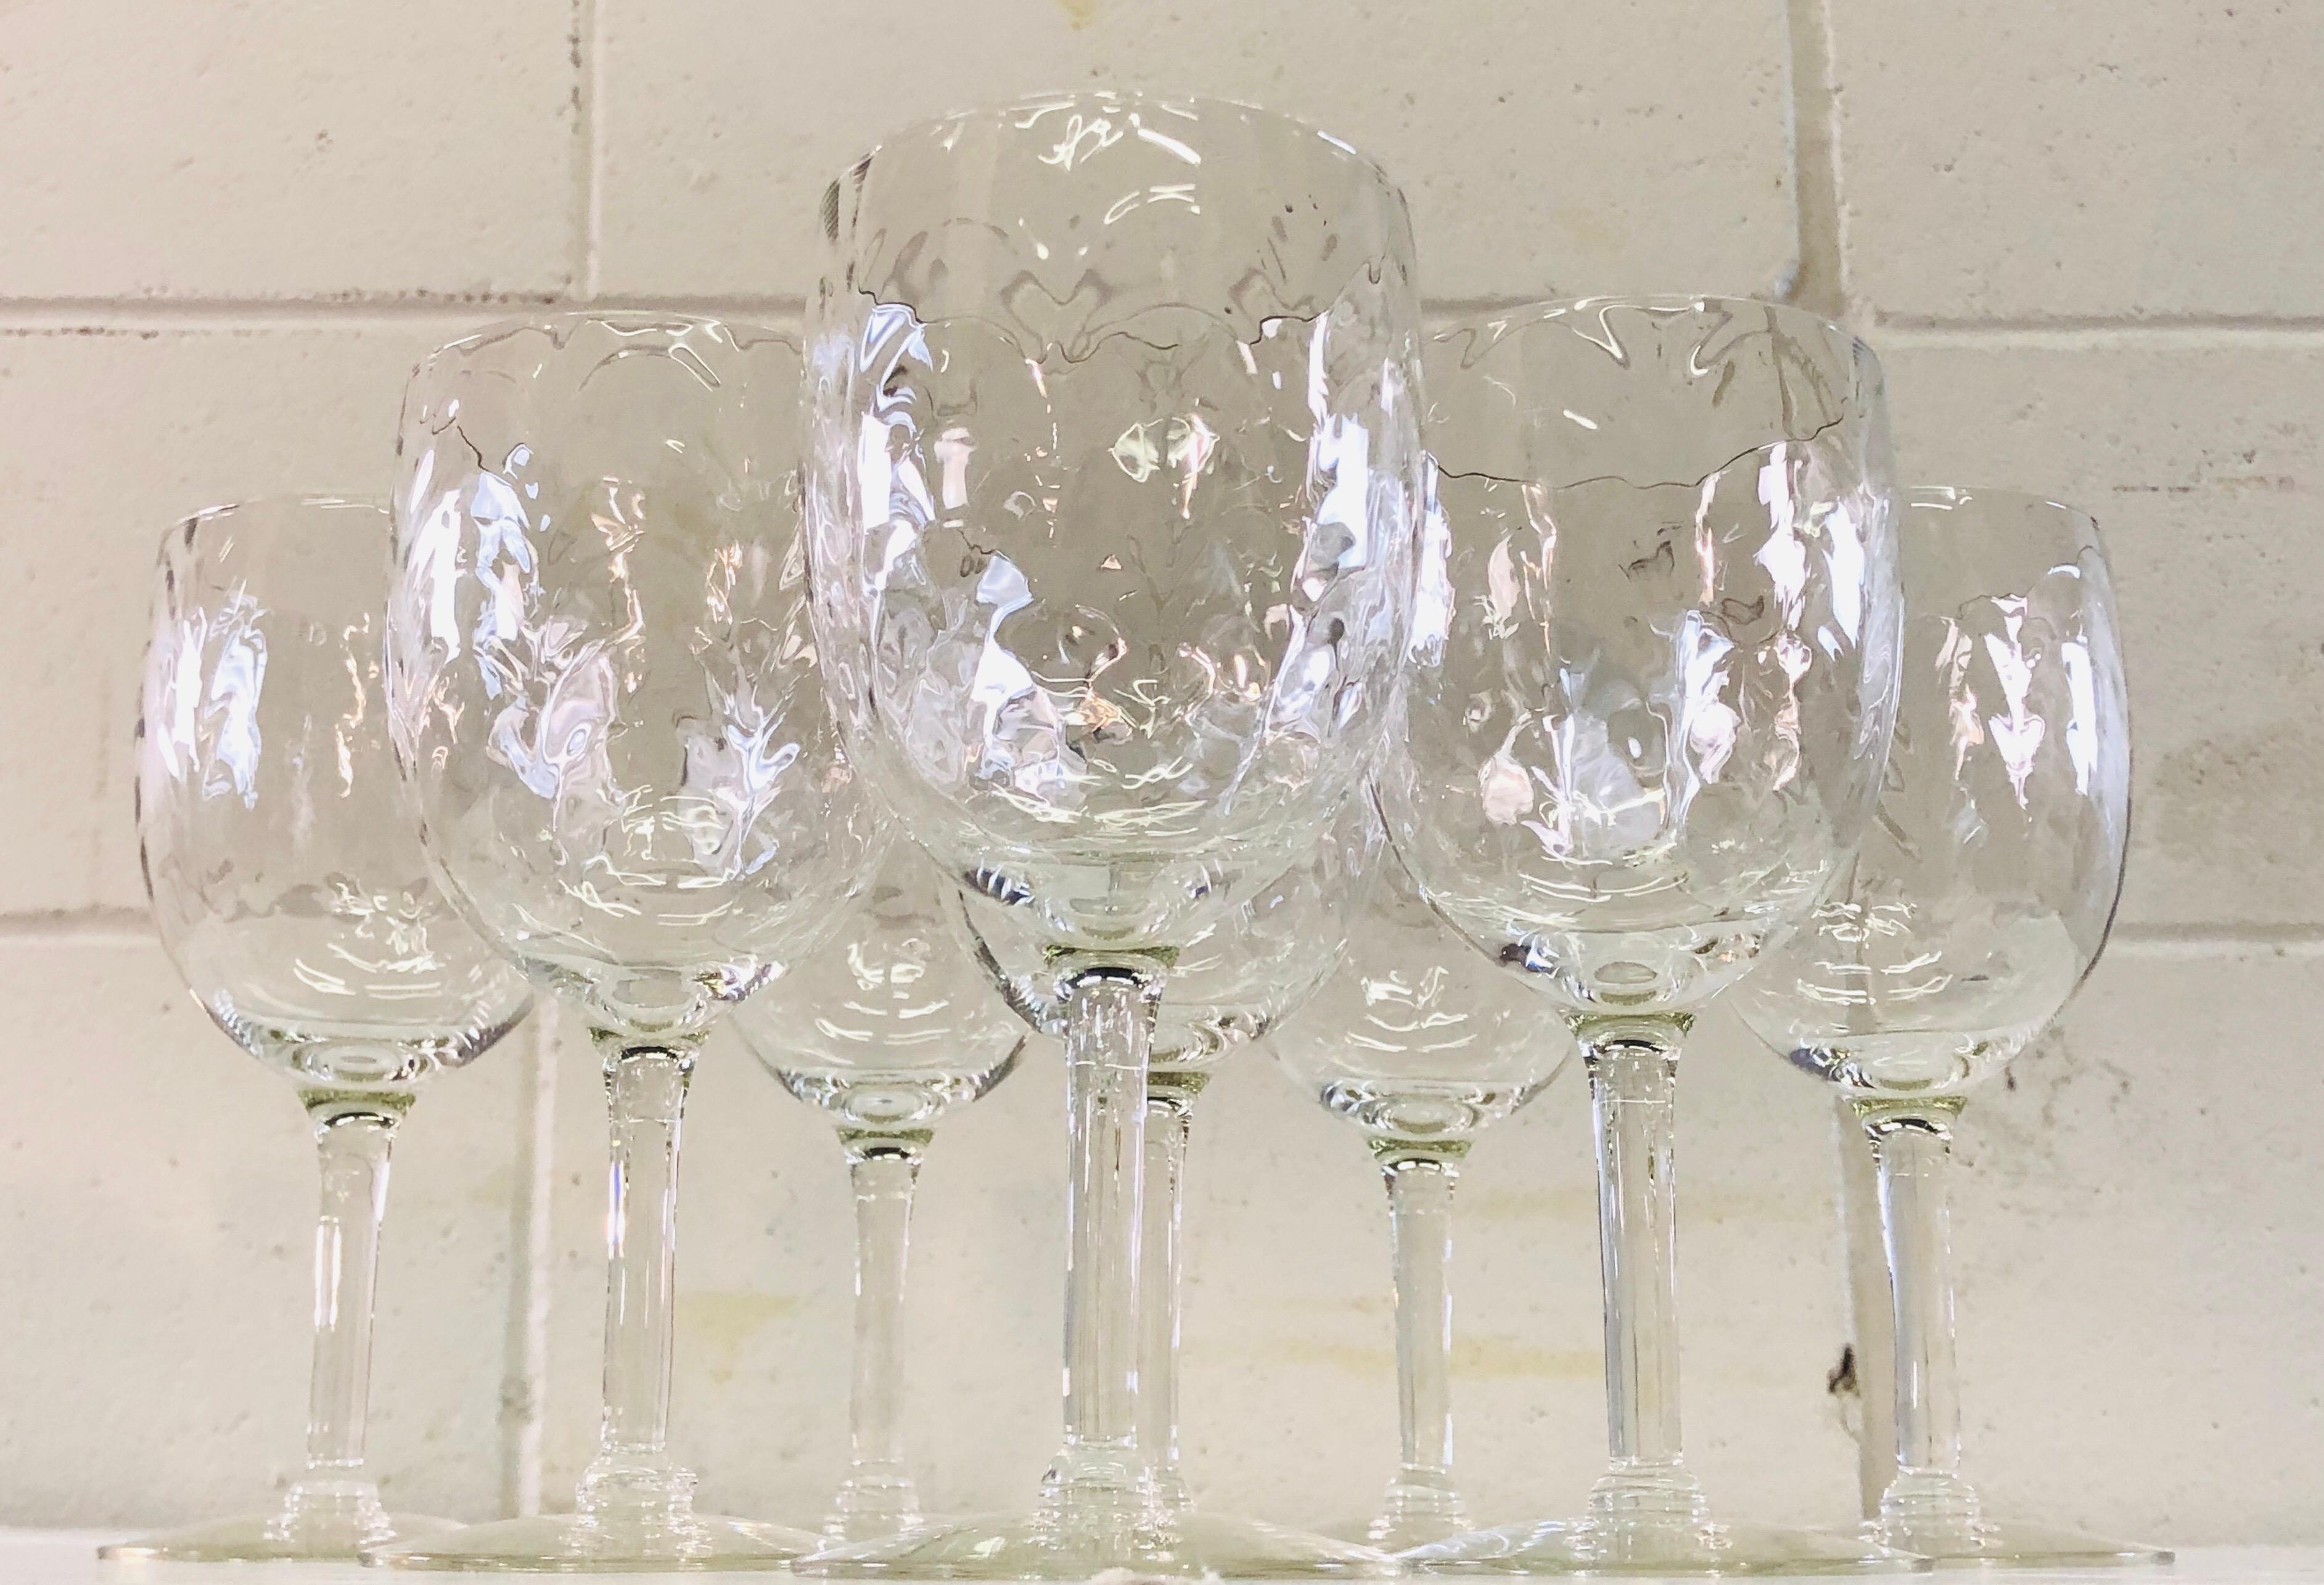 Vintage Mid-Century Modern set of 8 clear glass swag styled tall wine stems. No marks. Excellent condition.